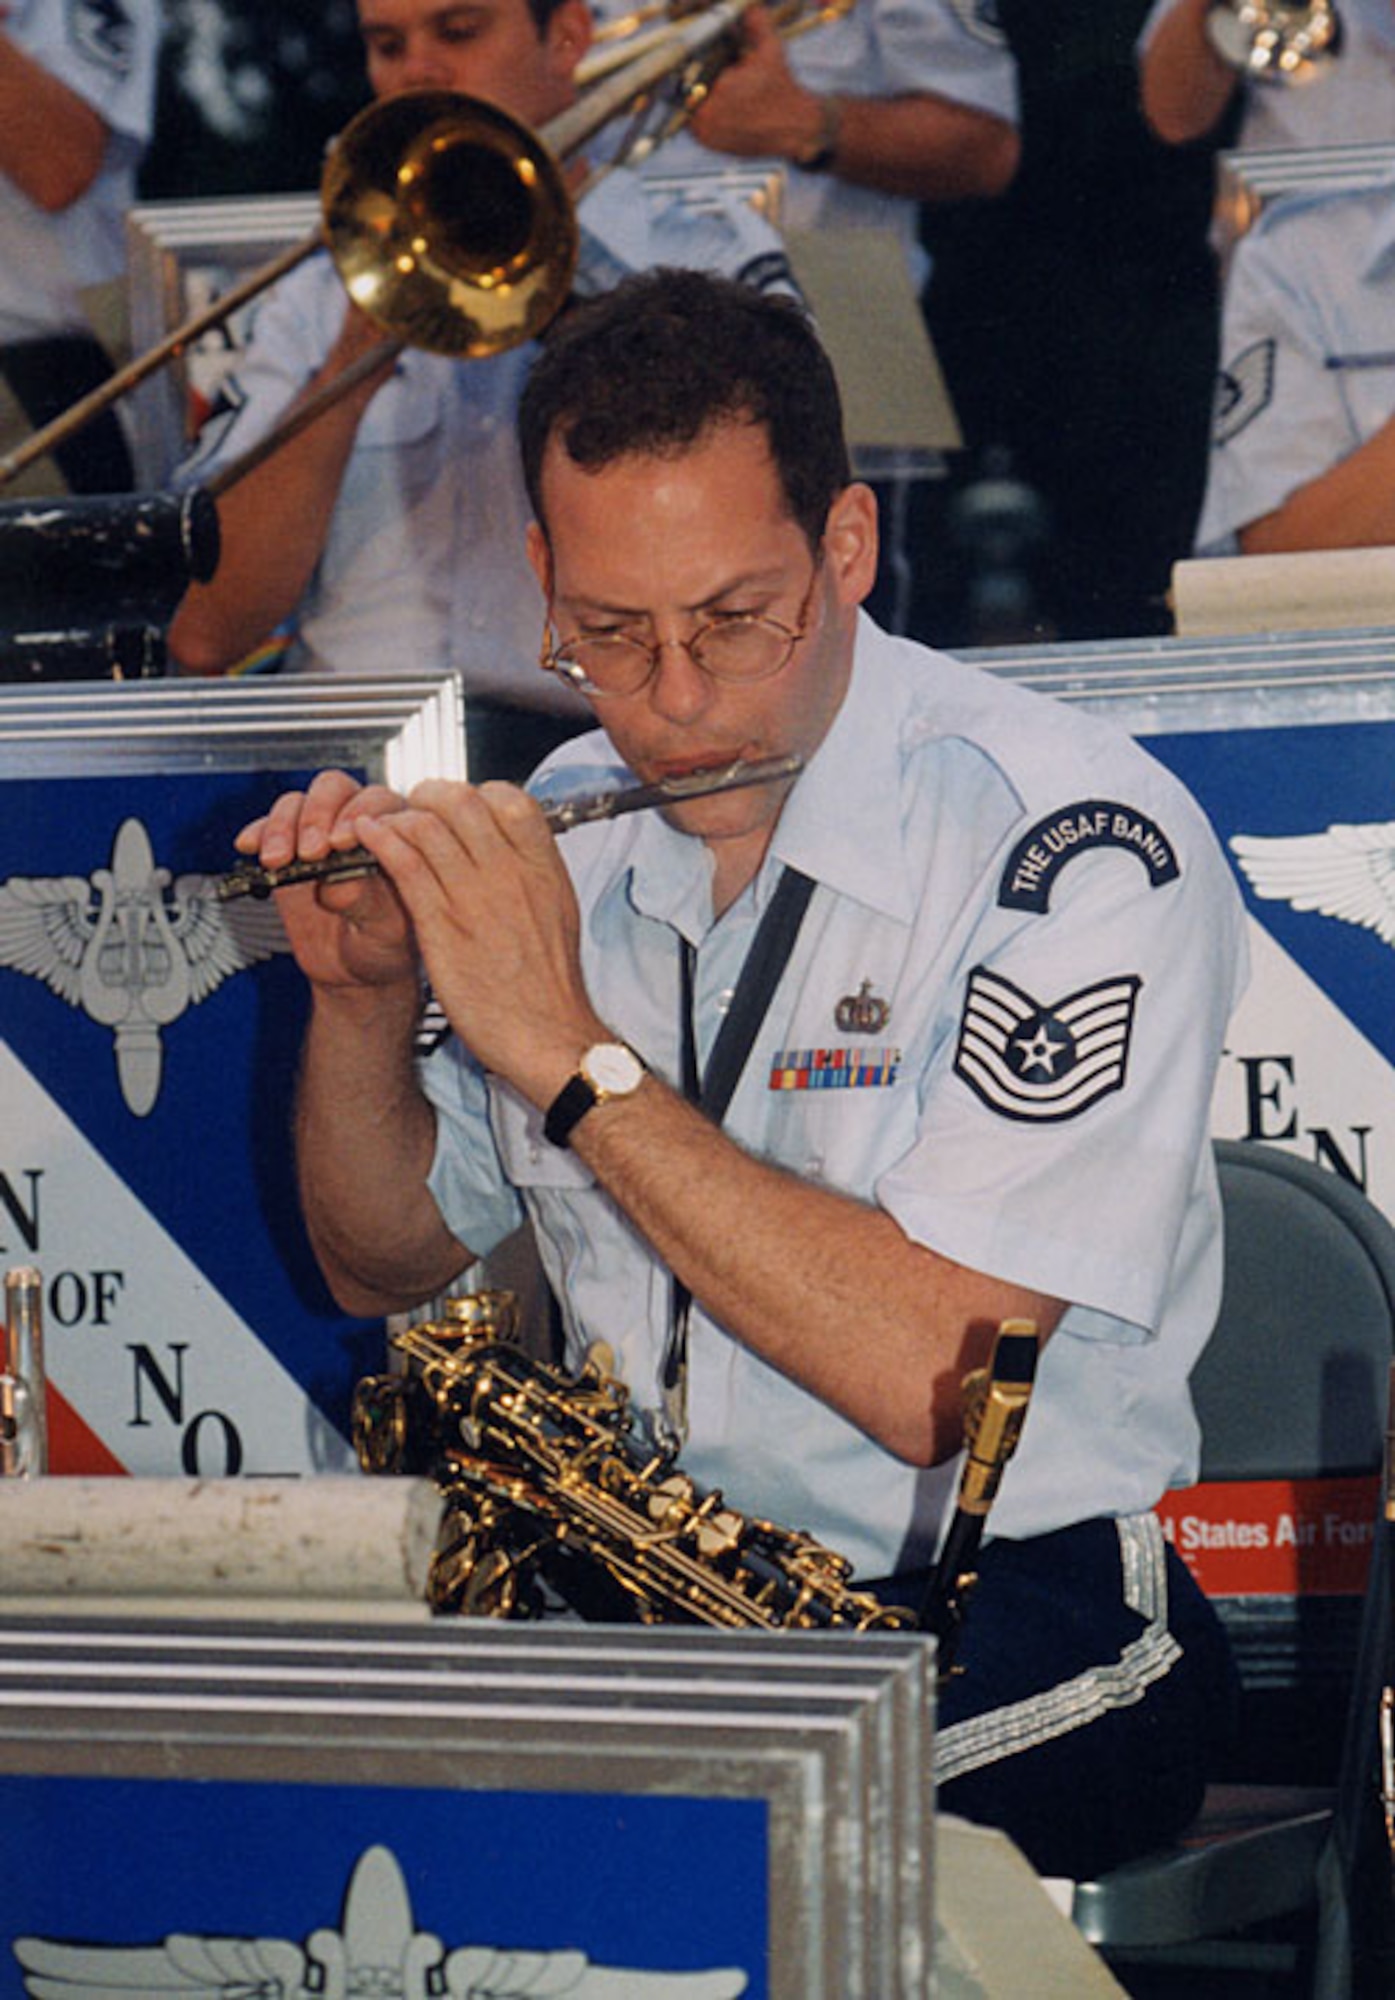 Jazz Alto saxophonist, Tech. Sgt. Andy Axelrad of the Airmen of Note, doubles on the piccolo and clarinet for the section. Photo Credit: Official U.S. Air Force Photo  
